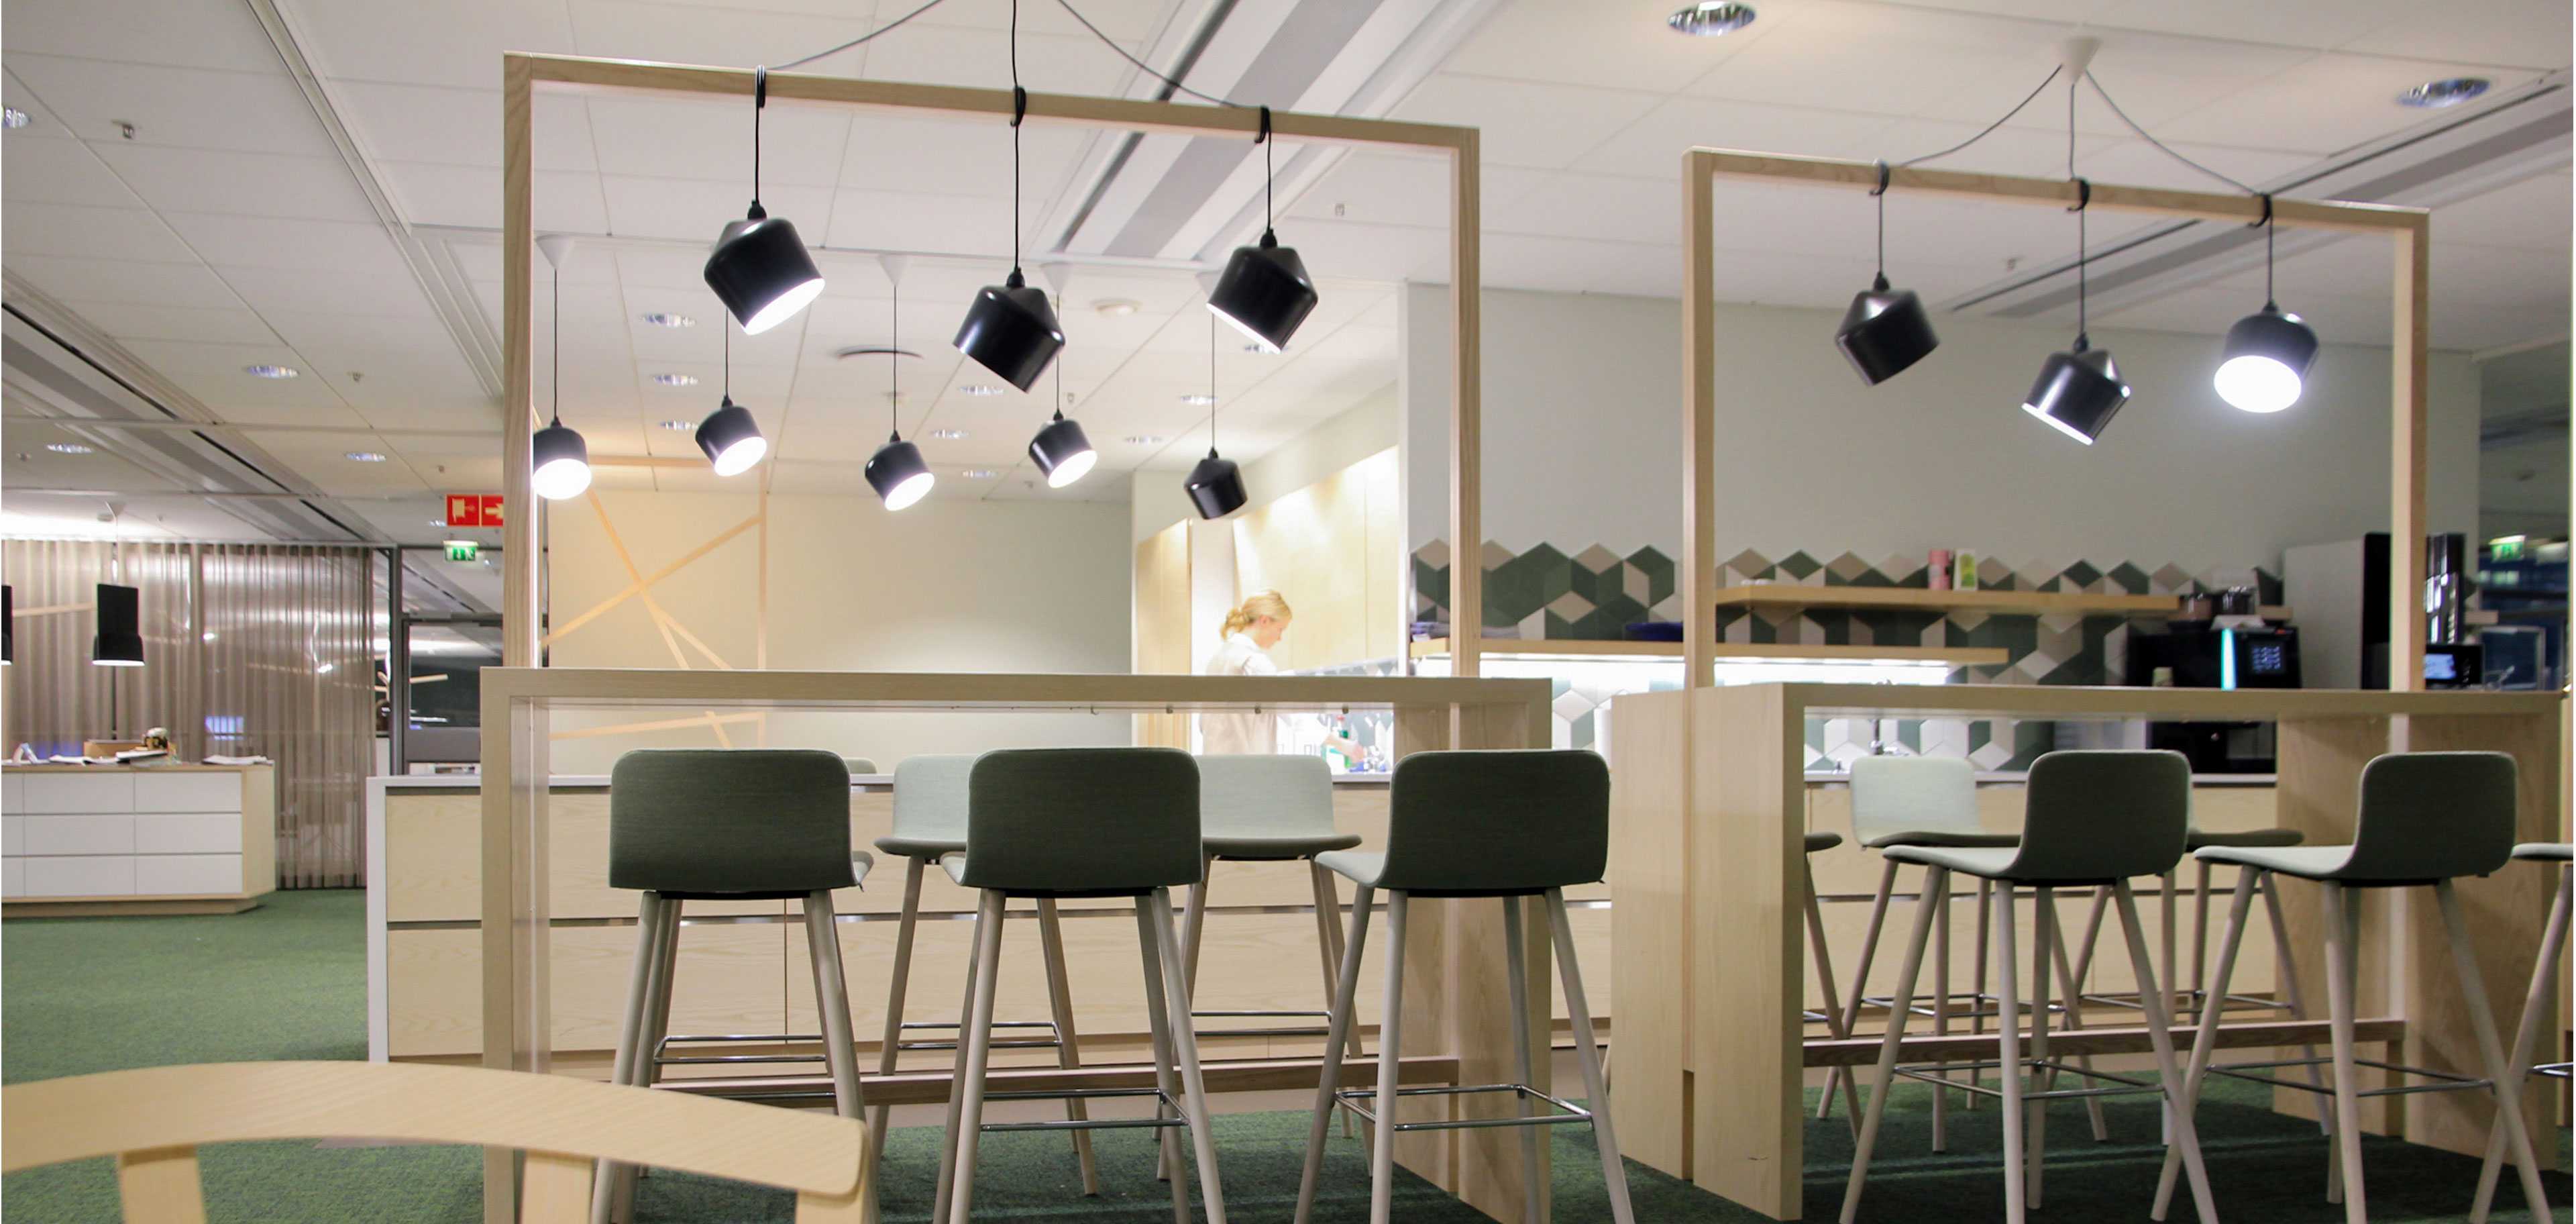 Martela's Sola chairs and Chat tables at Team Finland House in Helsinki